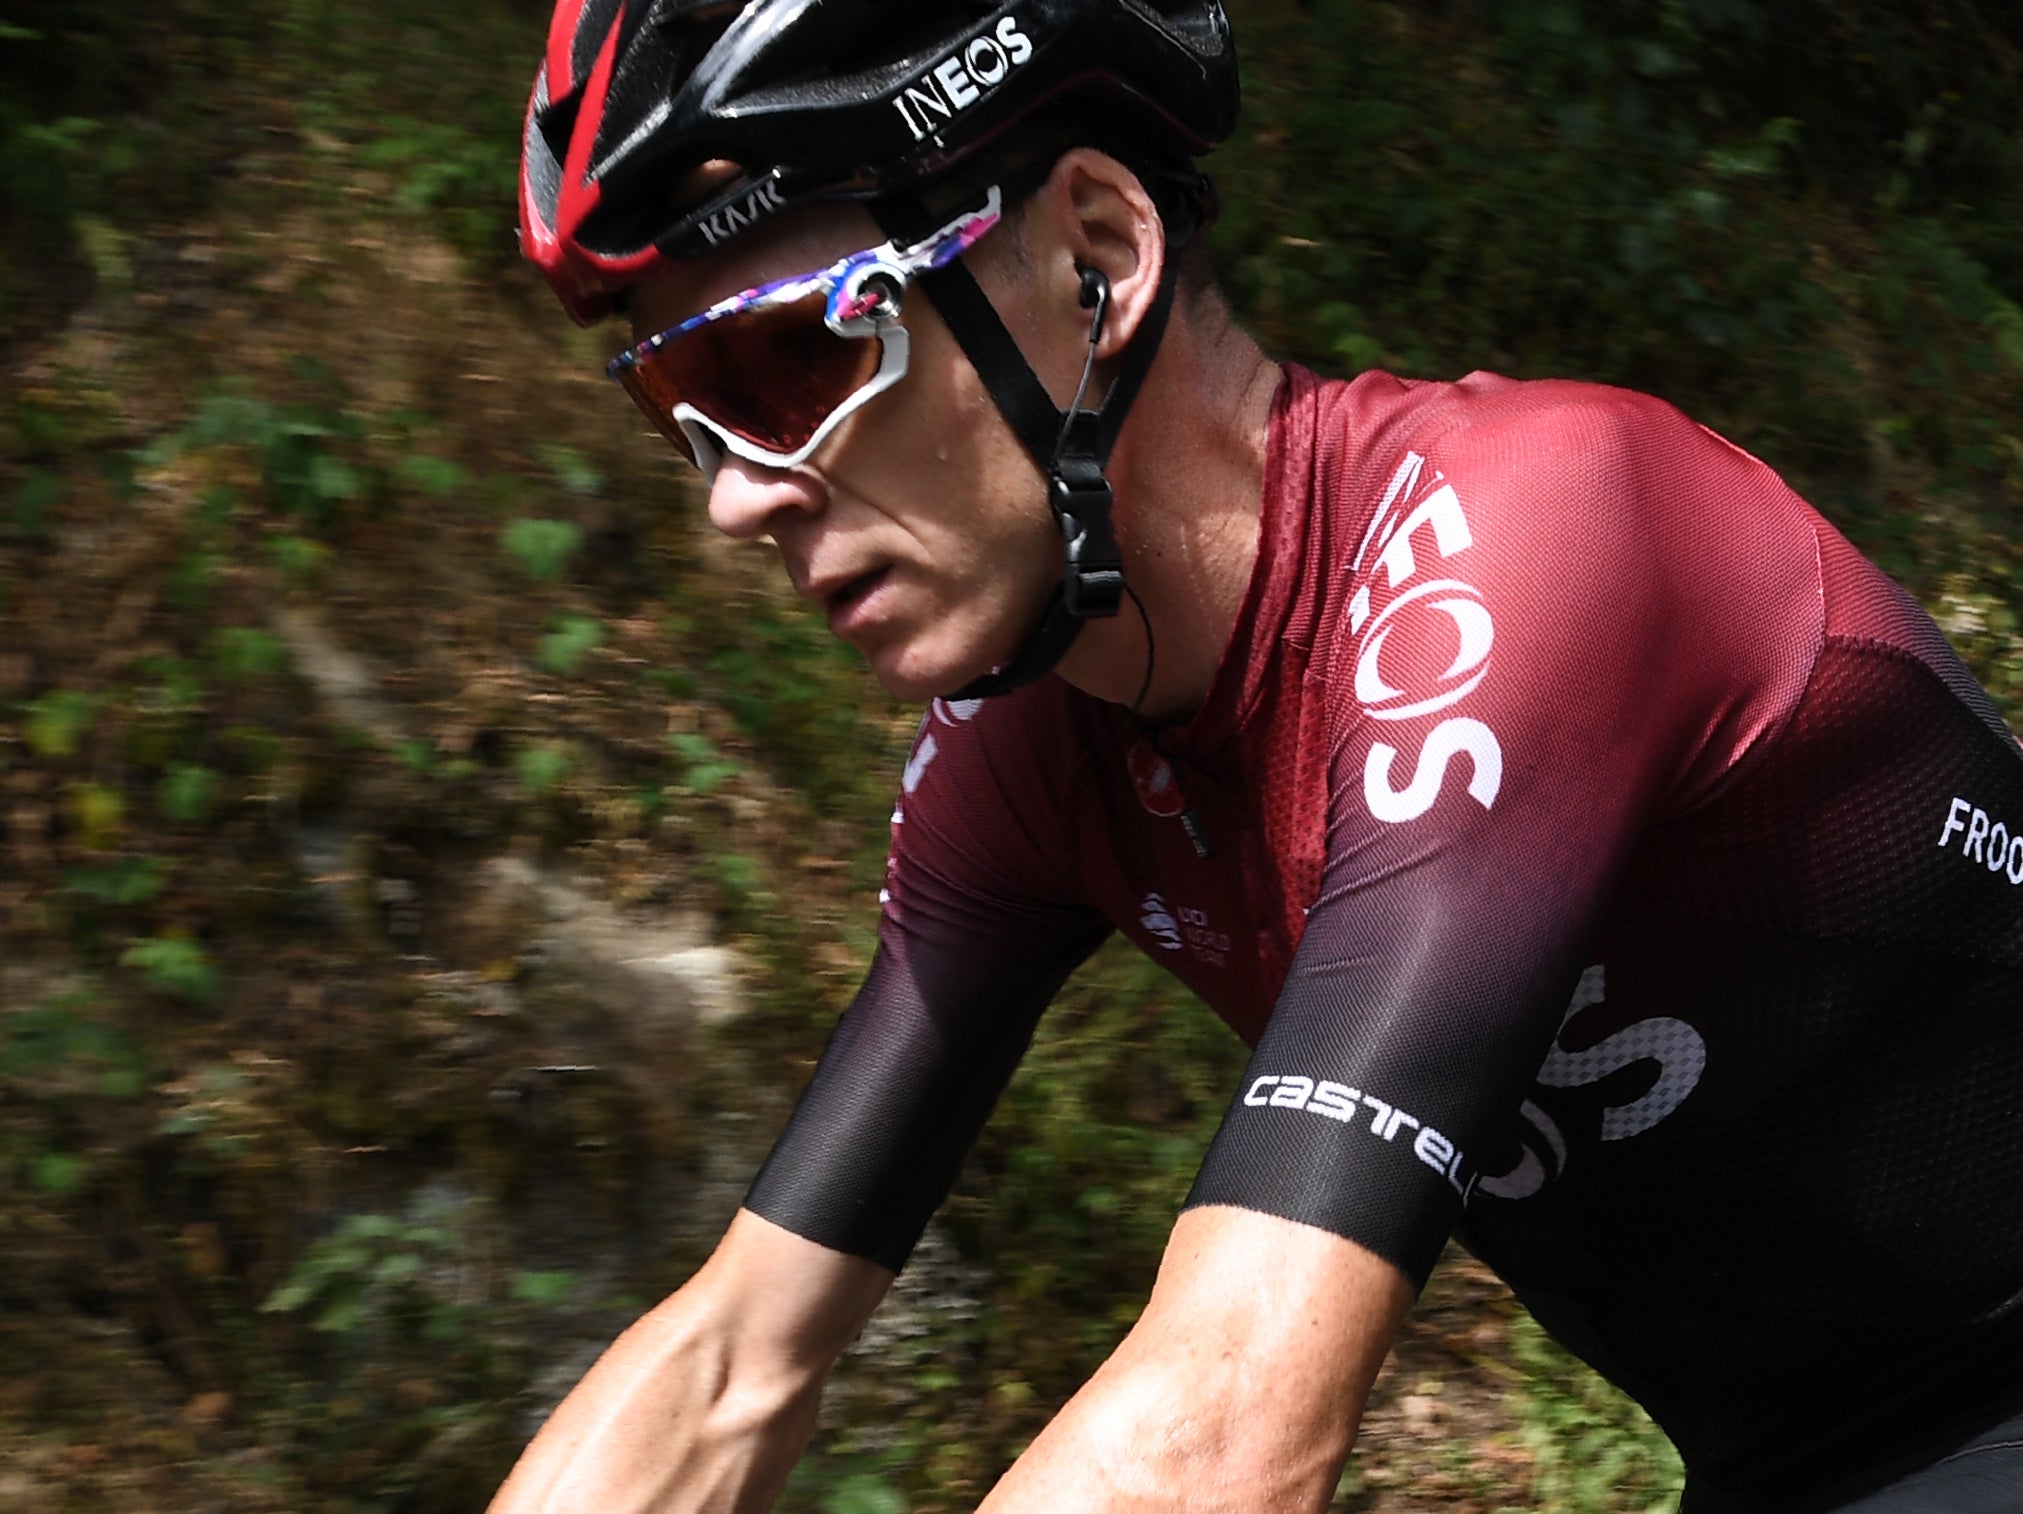 Chris Froome is set for his final race with Ineos Grenadiers